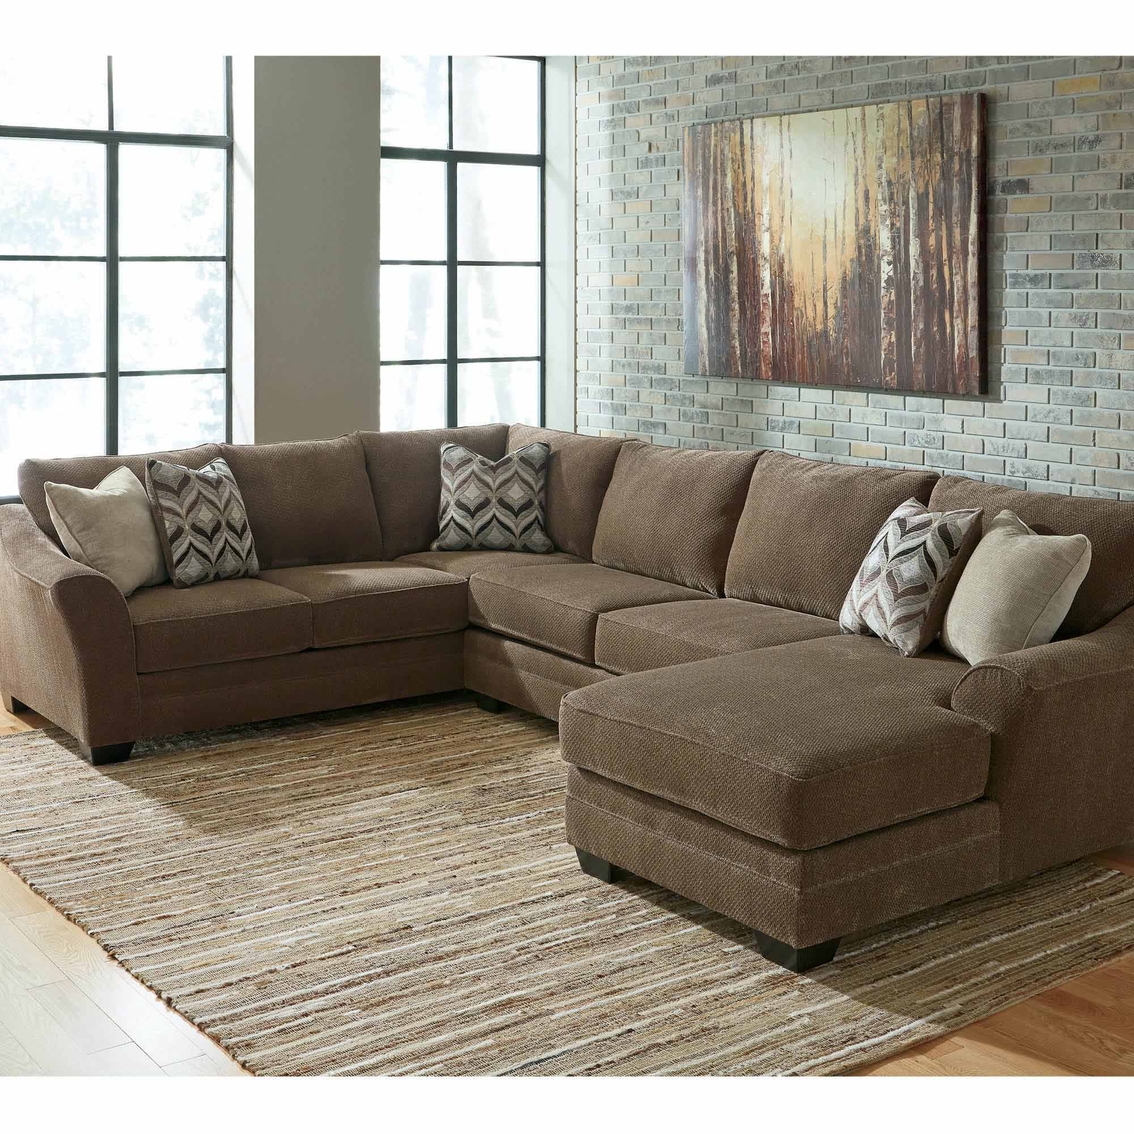 Benchcraft Justyna 3 Pc. Sectional With Raf Corner Chaise | Sofas ...